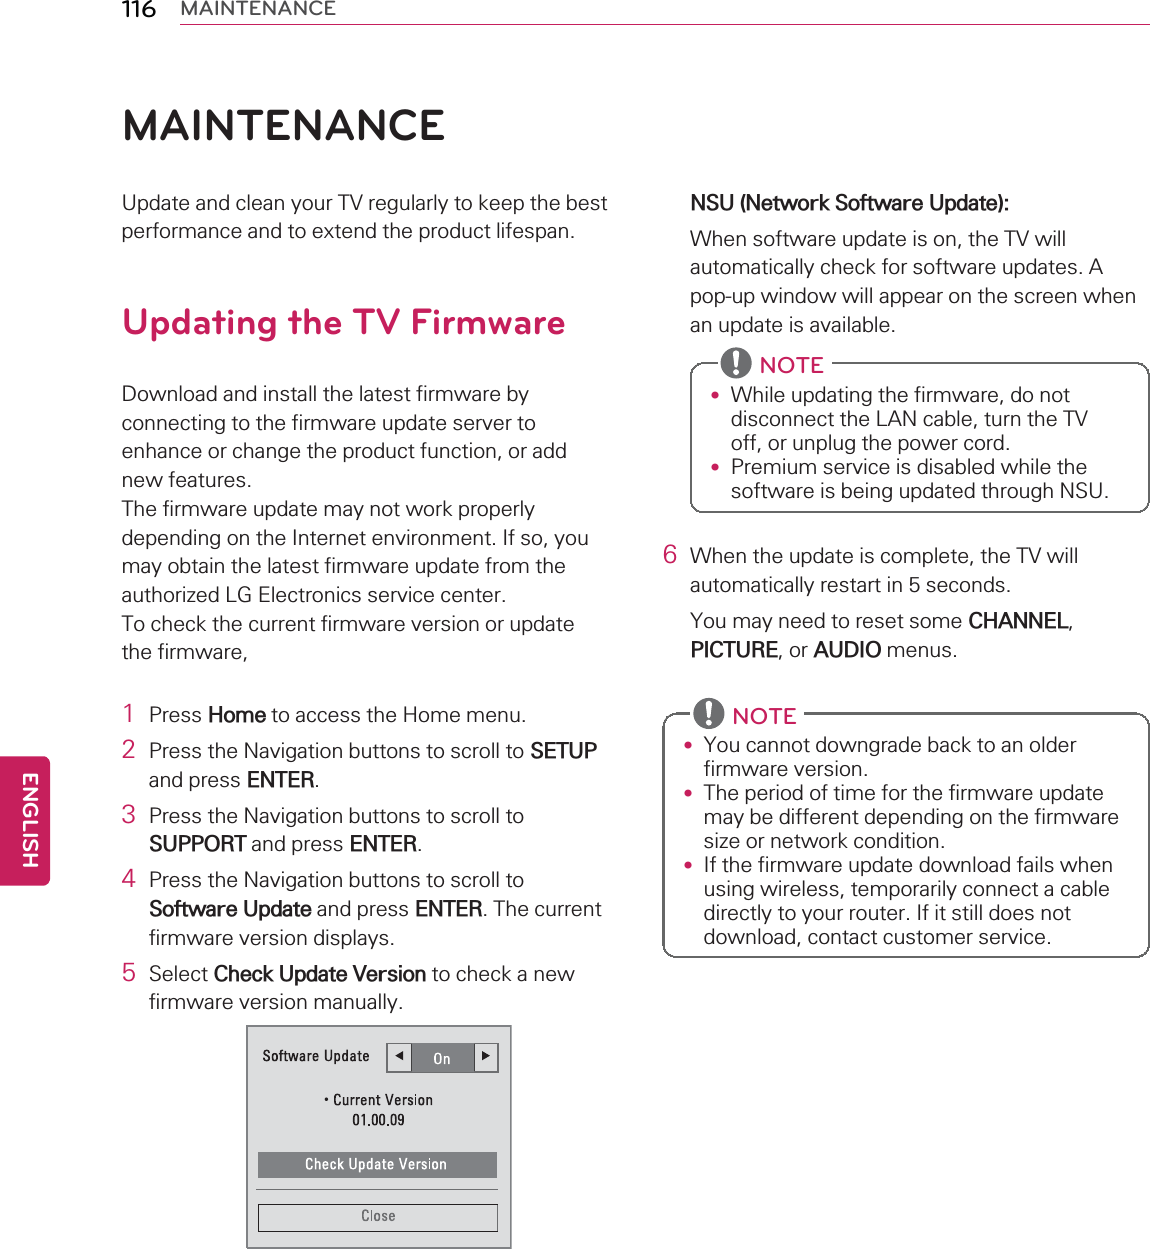 116 MAINTENANCEMAINTENANCEUpdate and clean your TV regularly to keep the bestperformance and to extend the product lifespan.Updating the TV FirmwareDownload and install the latest firmware byconnecting to the firmware update server toenhance or change the product function, or addnew features.The firmware update may not work properlydepending on the Internet environment. If so, youmay obtain the latest firmware update from theauthorized LG Electronics service center.To check the current firmware version or updatethe firmware,1Press Home to access the Home menu.2Press the Navigation buttons to scroll to SETUPand press ENTER.3Press the Navigation buttons to scroll toSUPPORT and press ENTER.4Press the Navigation buttons to scroll toSoftware Update and press ENTER. The currentfirmware version displays.5Select Check Update Version to check a newfirmware version manually.NSU (Network Software Update):When software update is on, the TV willautomatically check for software updates. Apop-up window will appear on the screen whenan update is available.NOTE•While updating the firmware, do notdisconnect the LAN cable, turn the TVoff, or unplug the power cord.•Premium service is disabled while thesoftware is being updated through NSU.6When the update is complete, the TV willautomatically restart in 5 seconds.You may need to reset some CHANNEL,PICTURE,orAUDIO menus.NOTE•You cannot downgrade back to an olderfirmware version.•The period of time for the firmware updatemay be different depending on the firmwaresize or network condition.•If the firmware update download fails whenusing wireless, temporarily connect a cabledirectly to your router. If it still does notdownload, contact customer service.ENGLISH